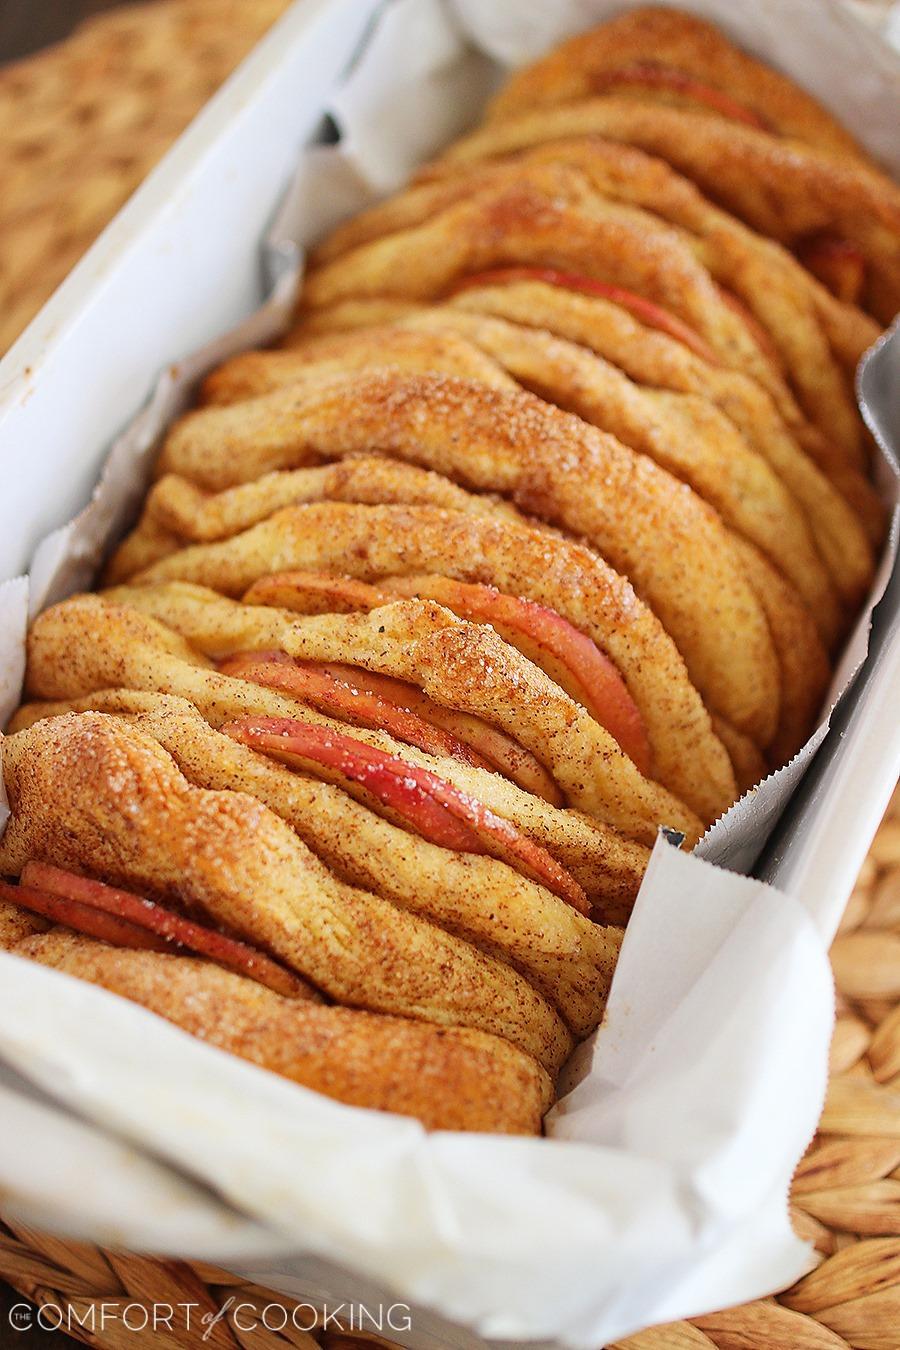 Apple Pie Pull Apart Bread with Vanilla Glaze – Soft layers of cinnamon-sugar biscuit dough and fresh apple slices combine in this amazing pull apart bread! | thecomfortofcooking.com